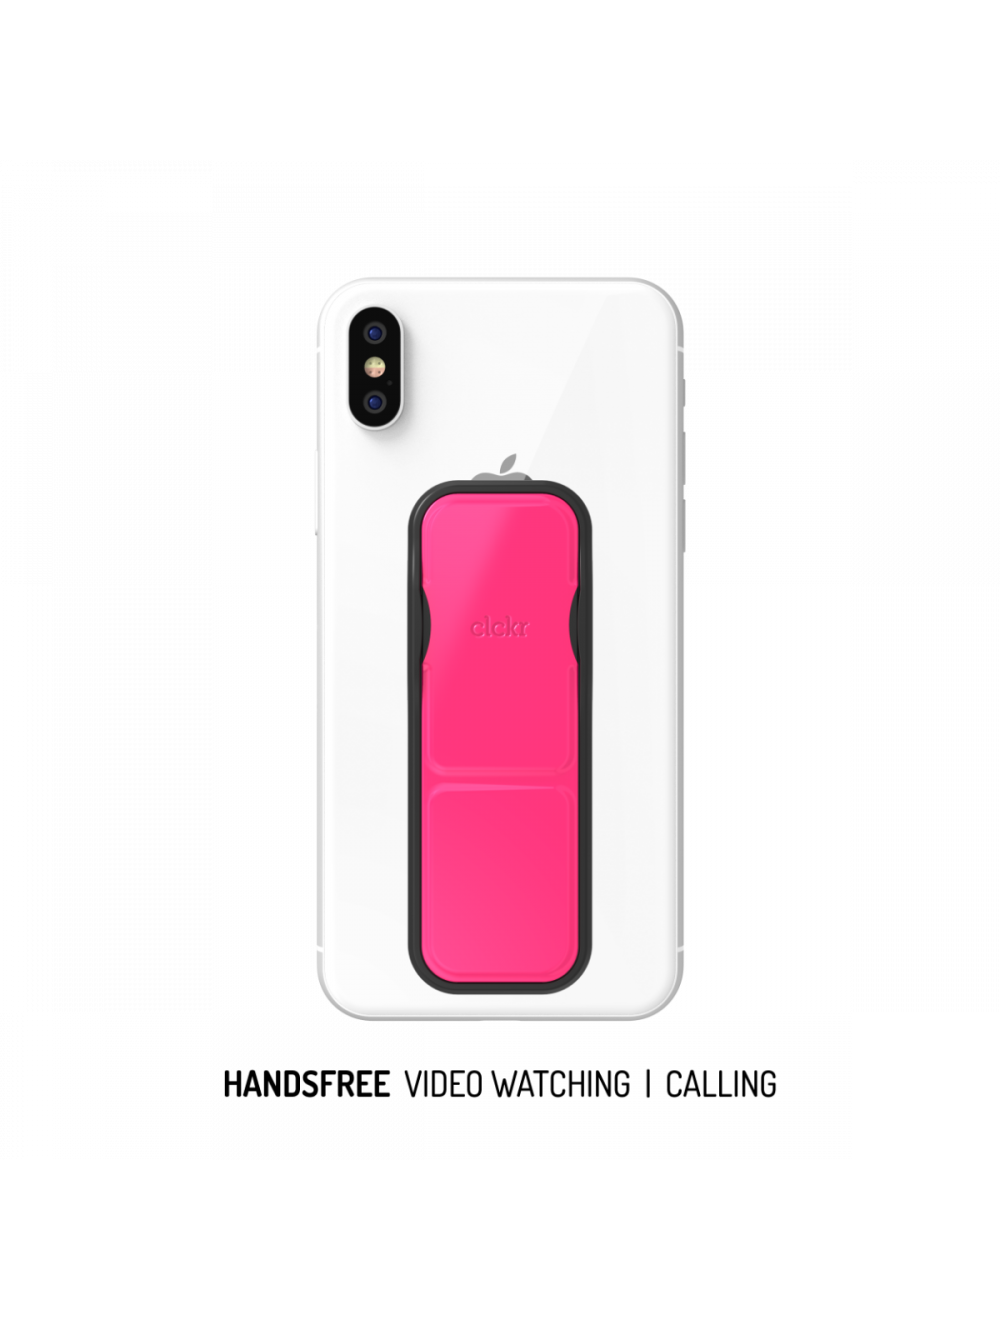 Universal Foundation Phone Stand & Grip - Pink